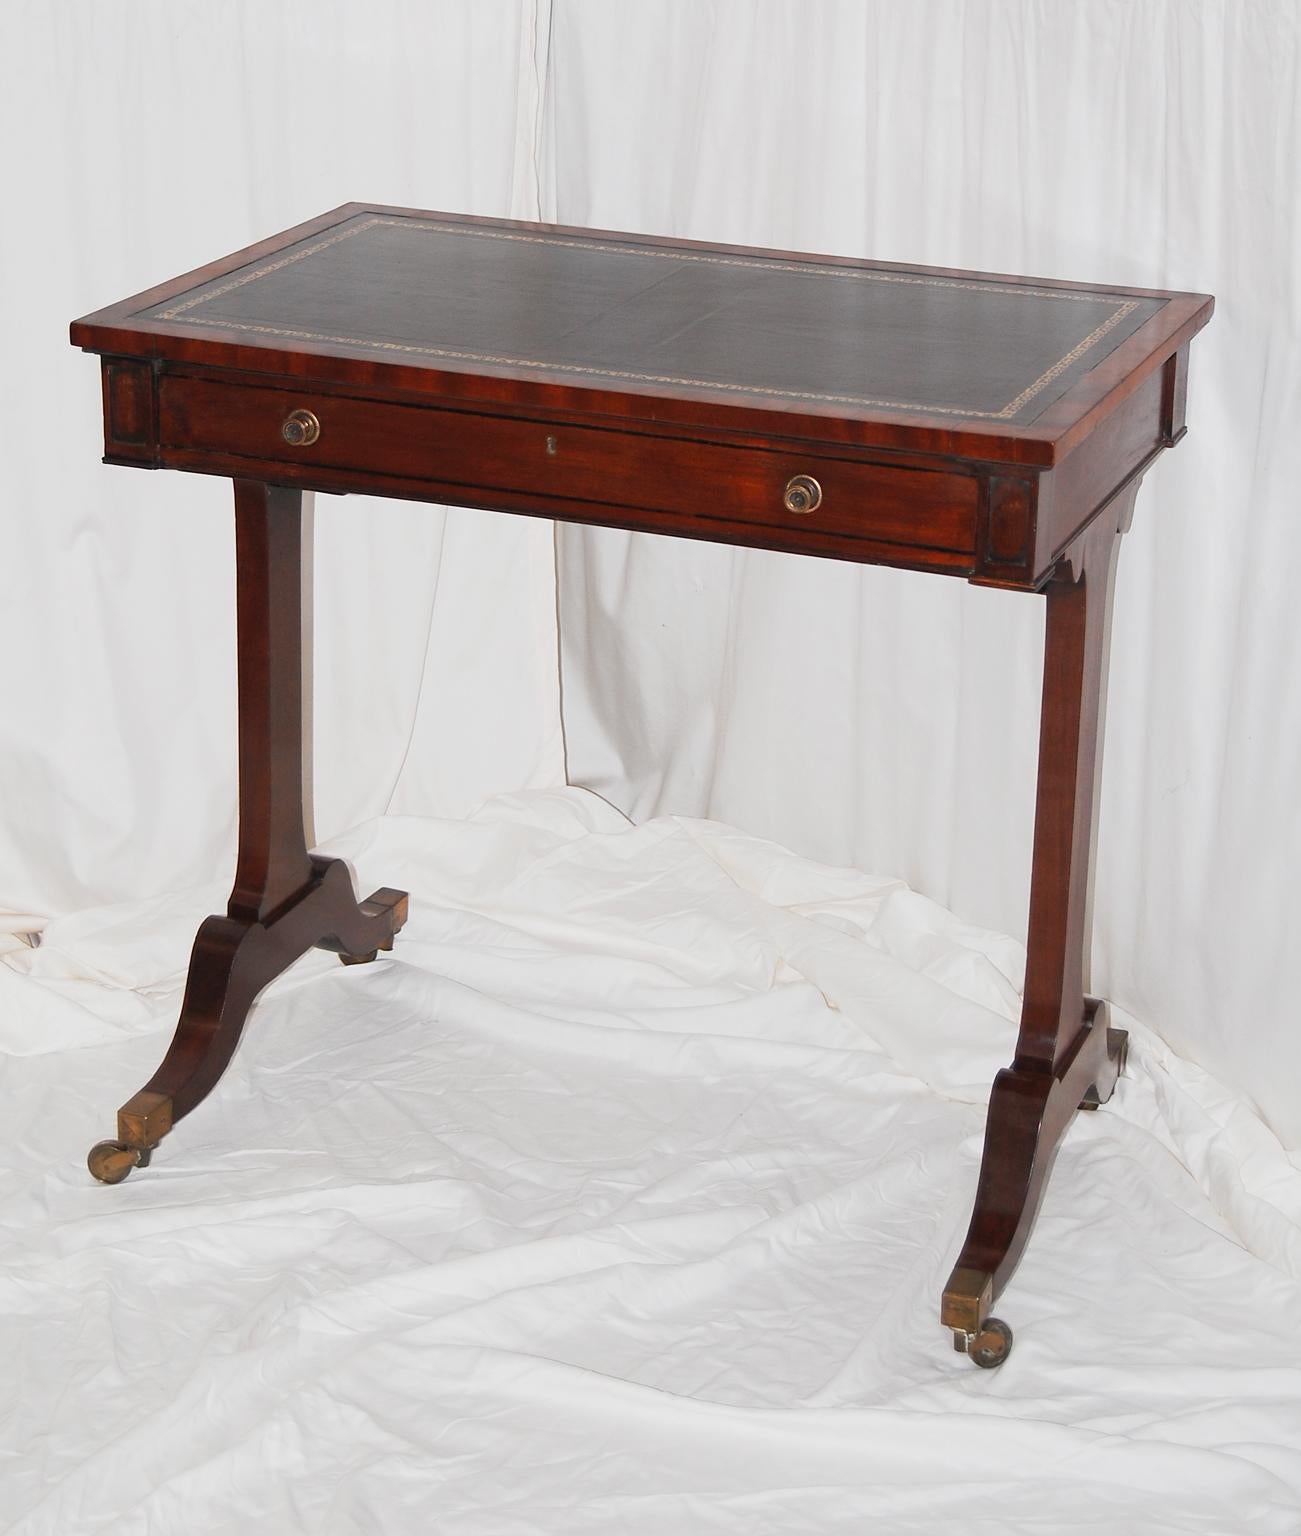 English Regency Period Mahogany Writing Table with Pedestal Ends 33 Inches Wide For Sale 4